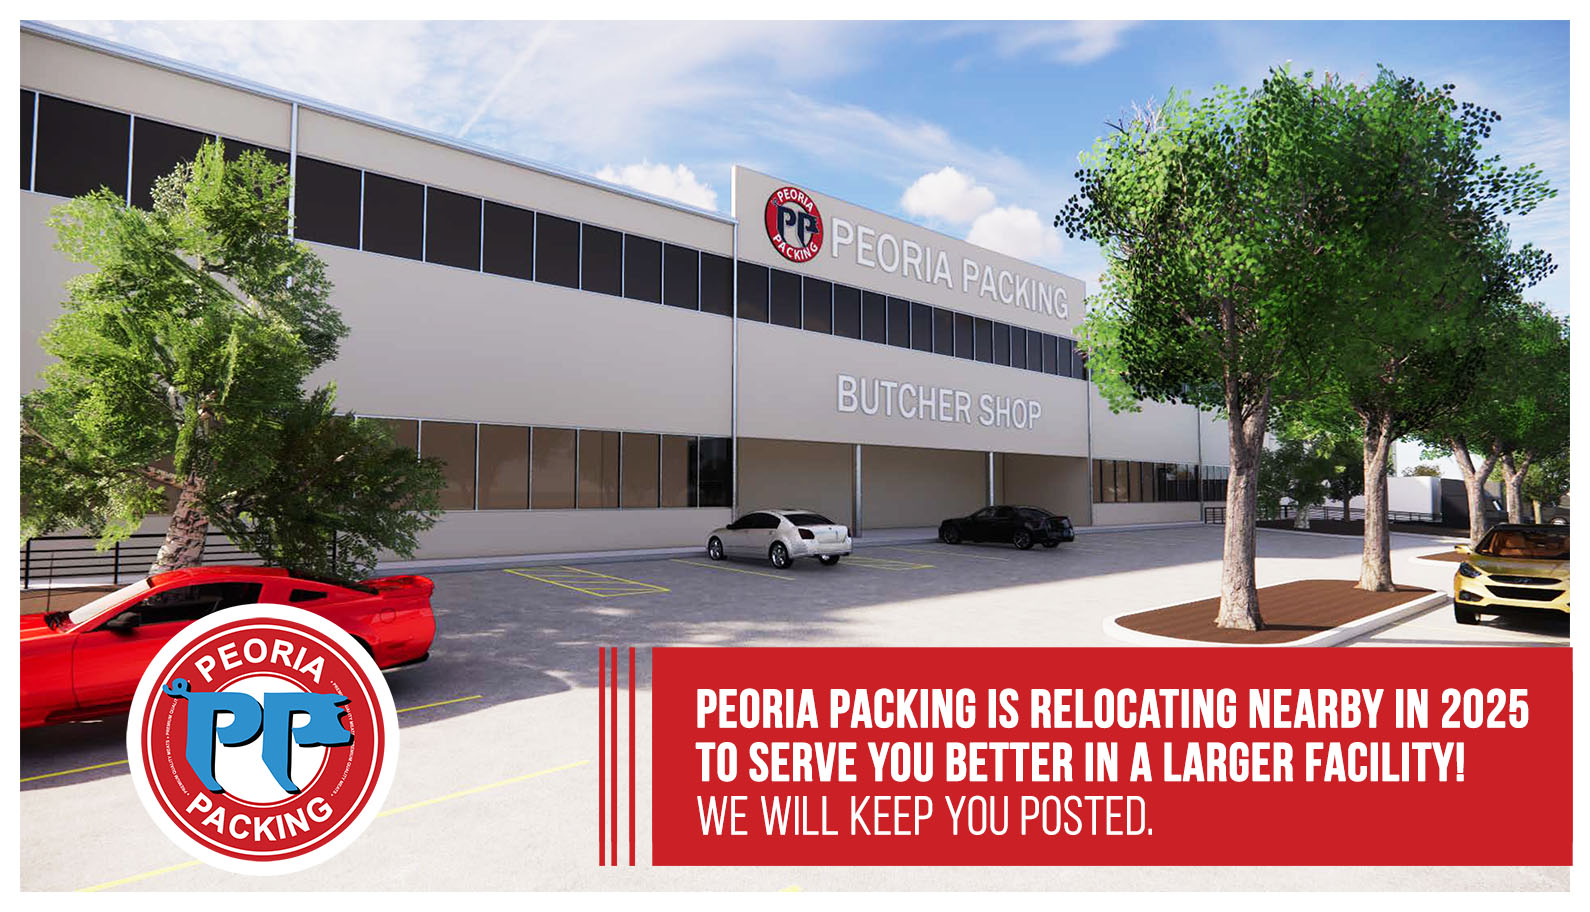 Peoria Packing is relocating nearby in 2025 to serve you better in a larger facility! We will keep you posted.